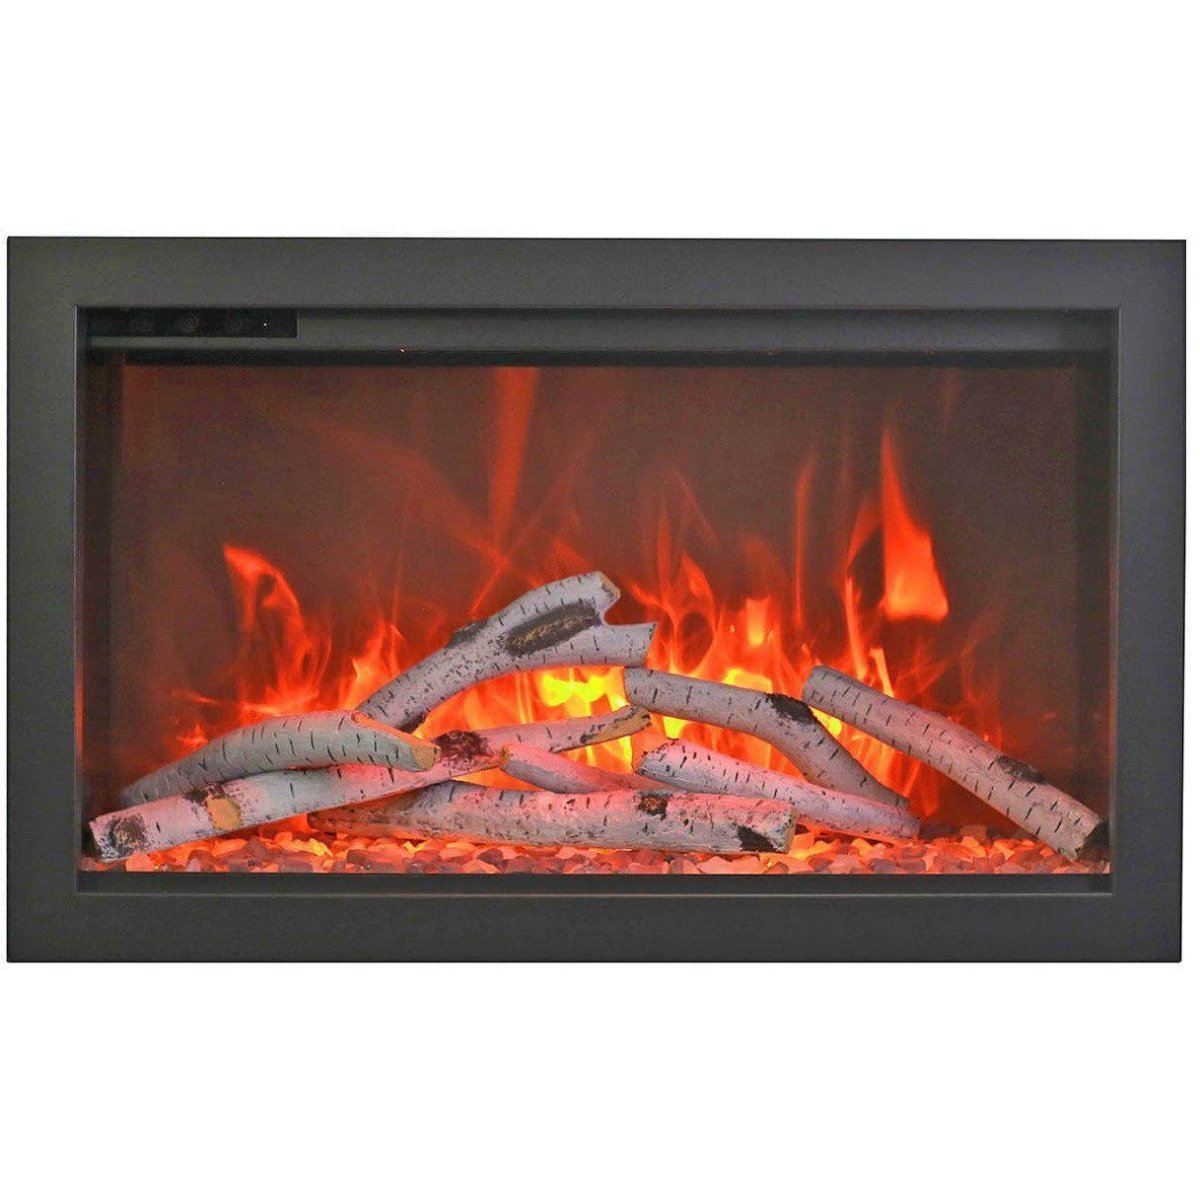 Amantii TRD-30 - Traditional Series Electric Fireplace - 76cm - Outdoorium